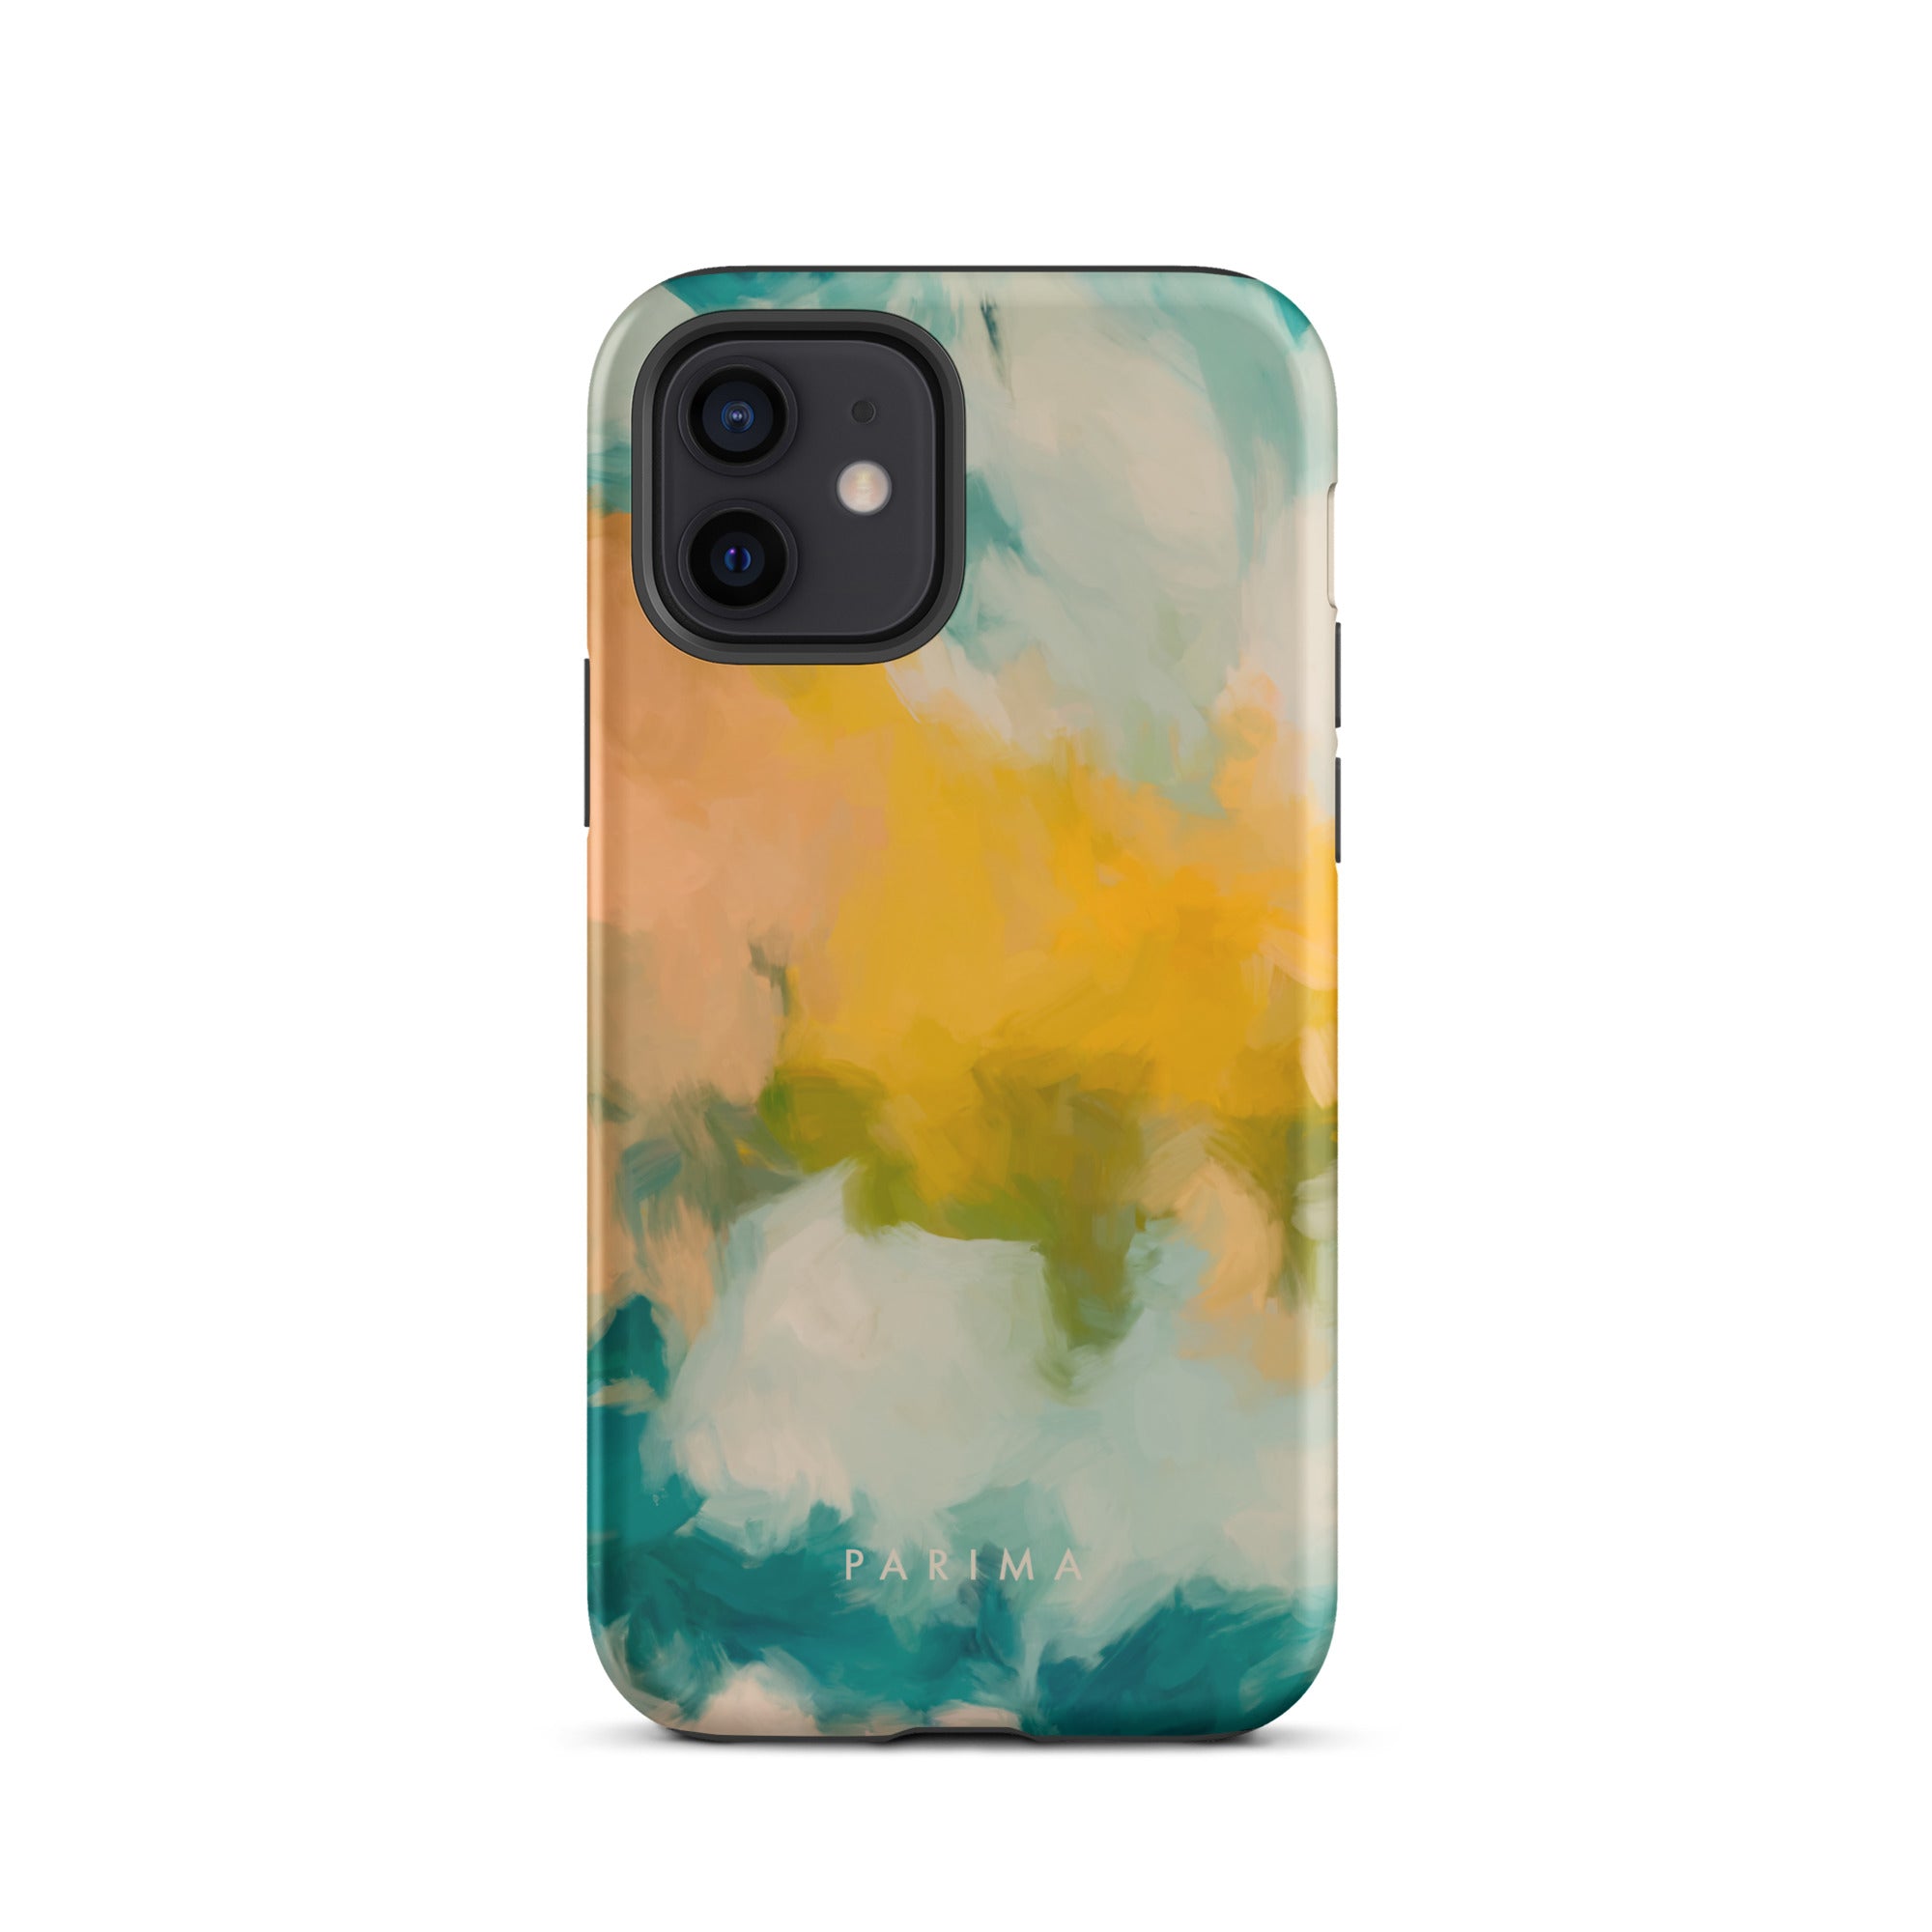 Beach Day, blue and yellow abstract art - iPhone 12 tough case by Parima Studio